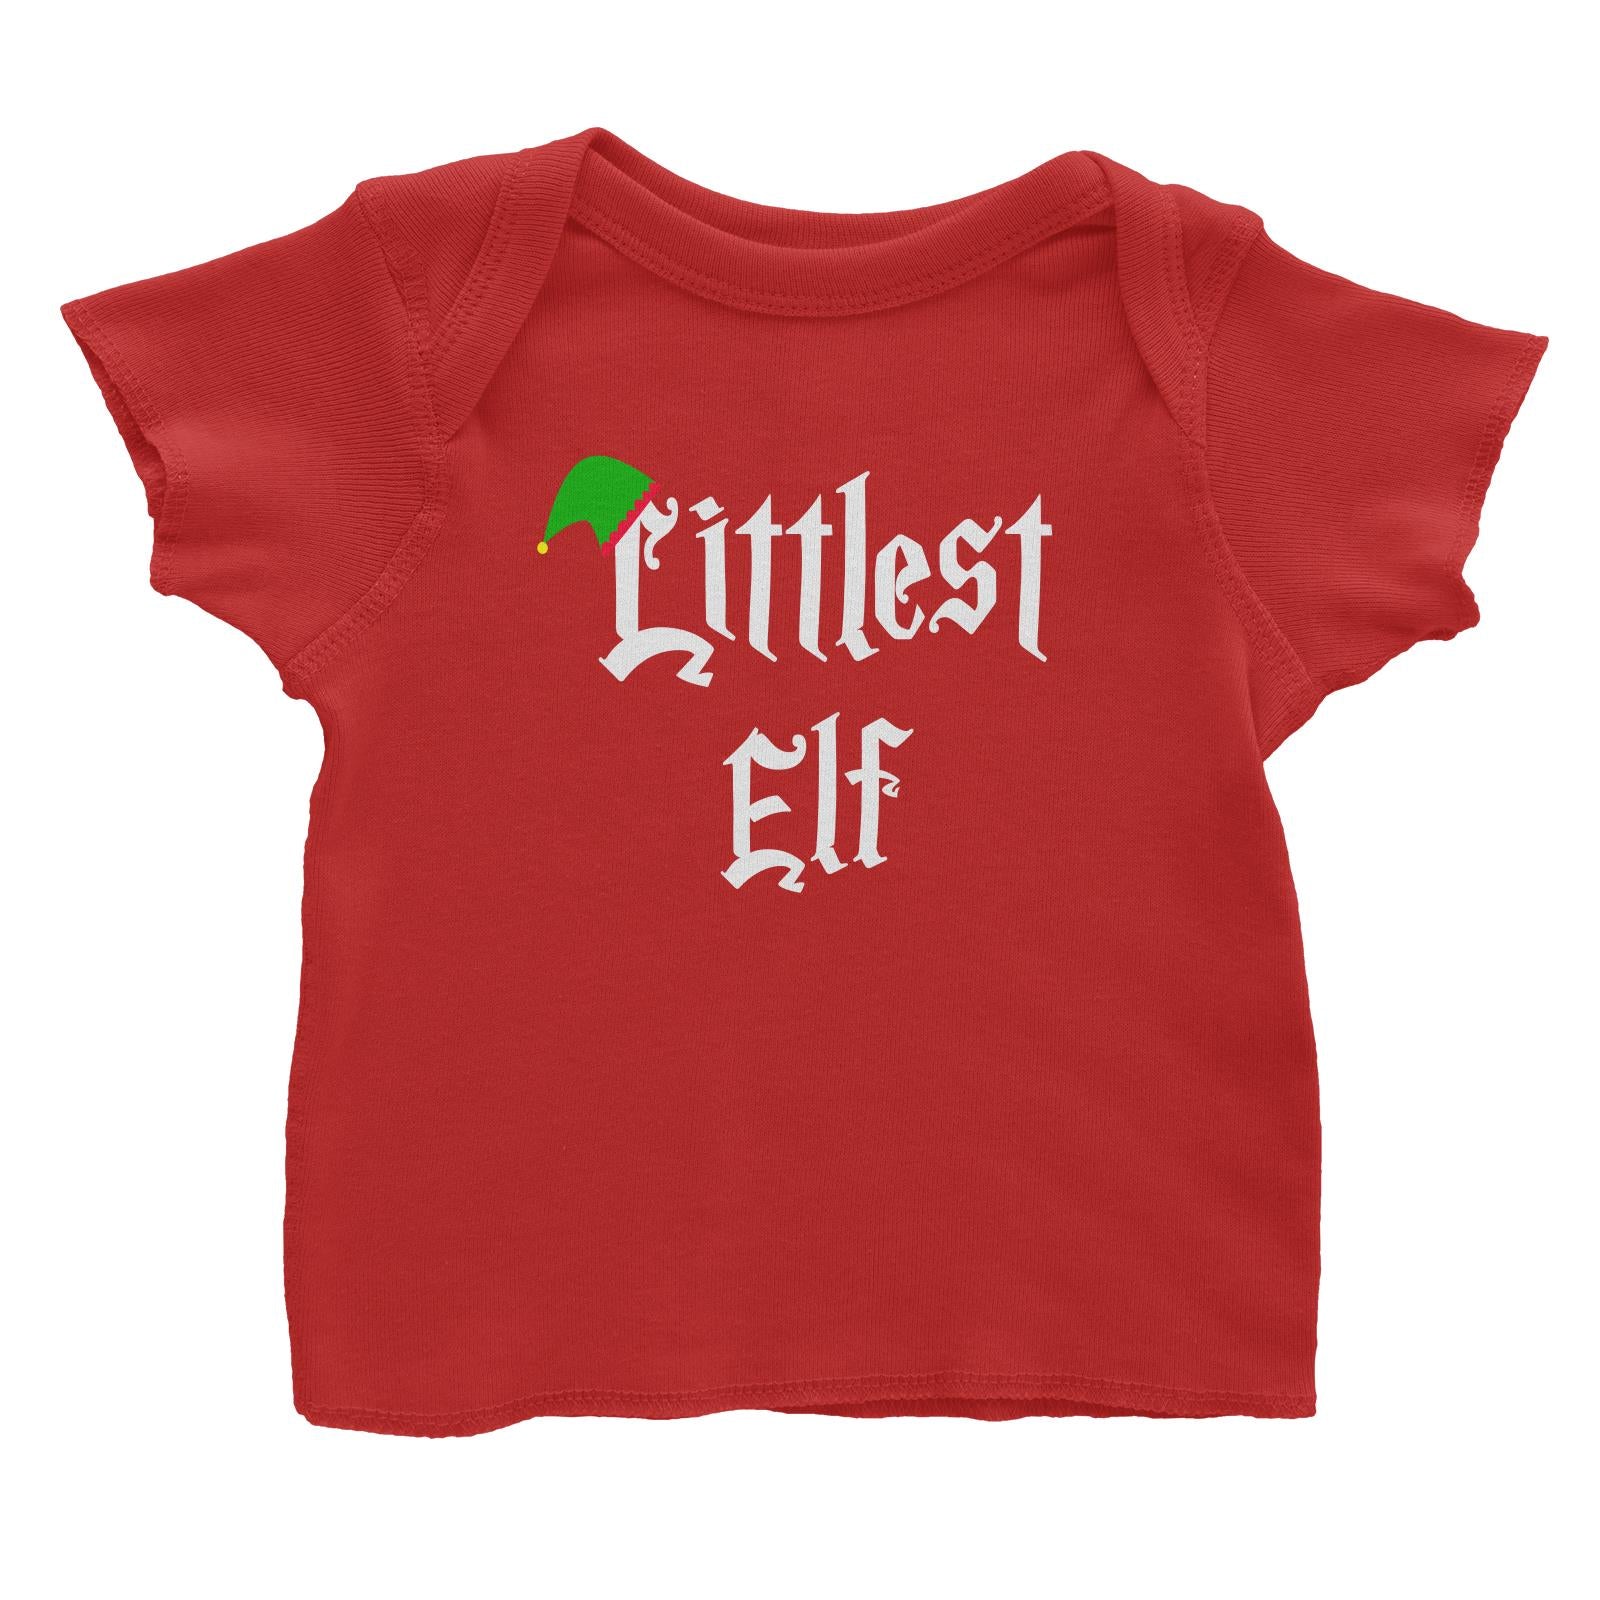 Littlest Elf With Hat Baby T-Shirt Christmas Matching Family